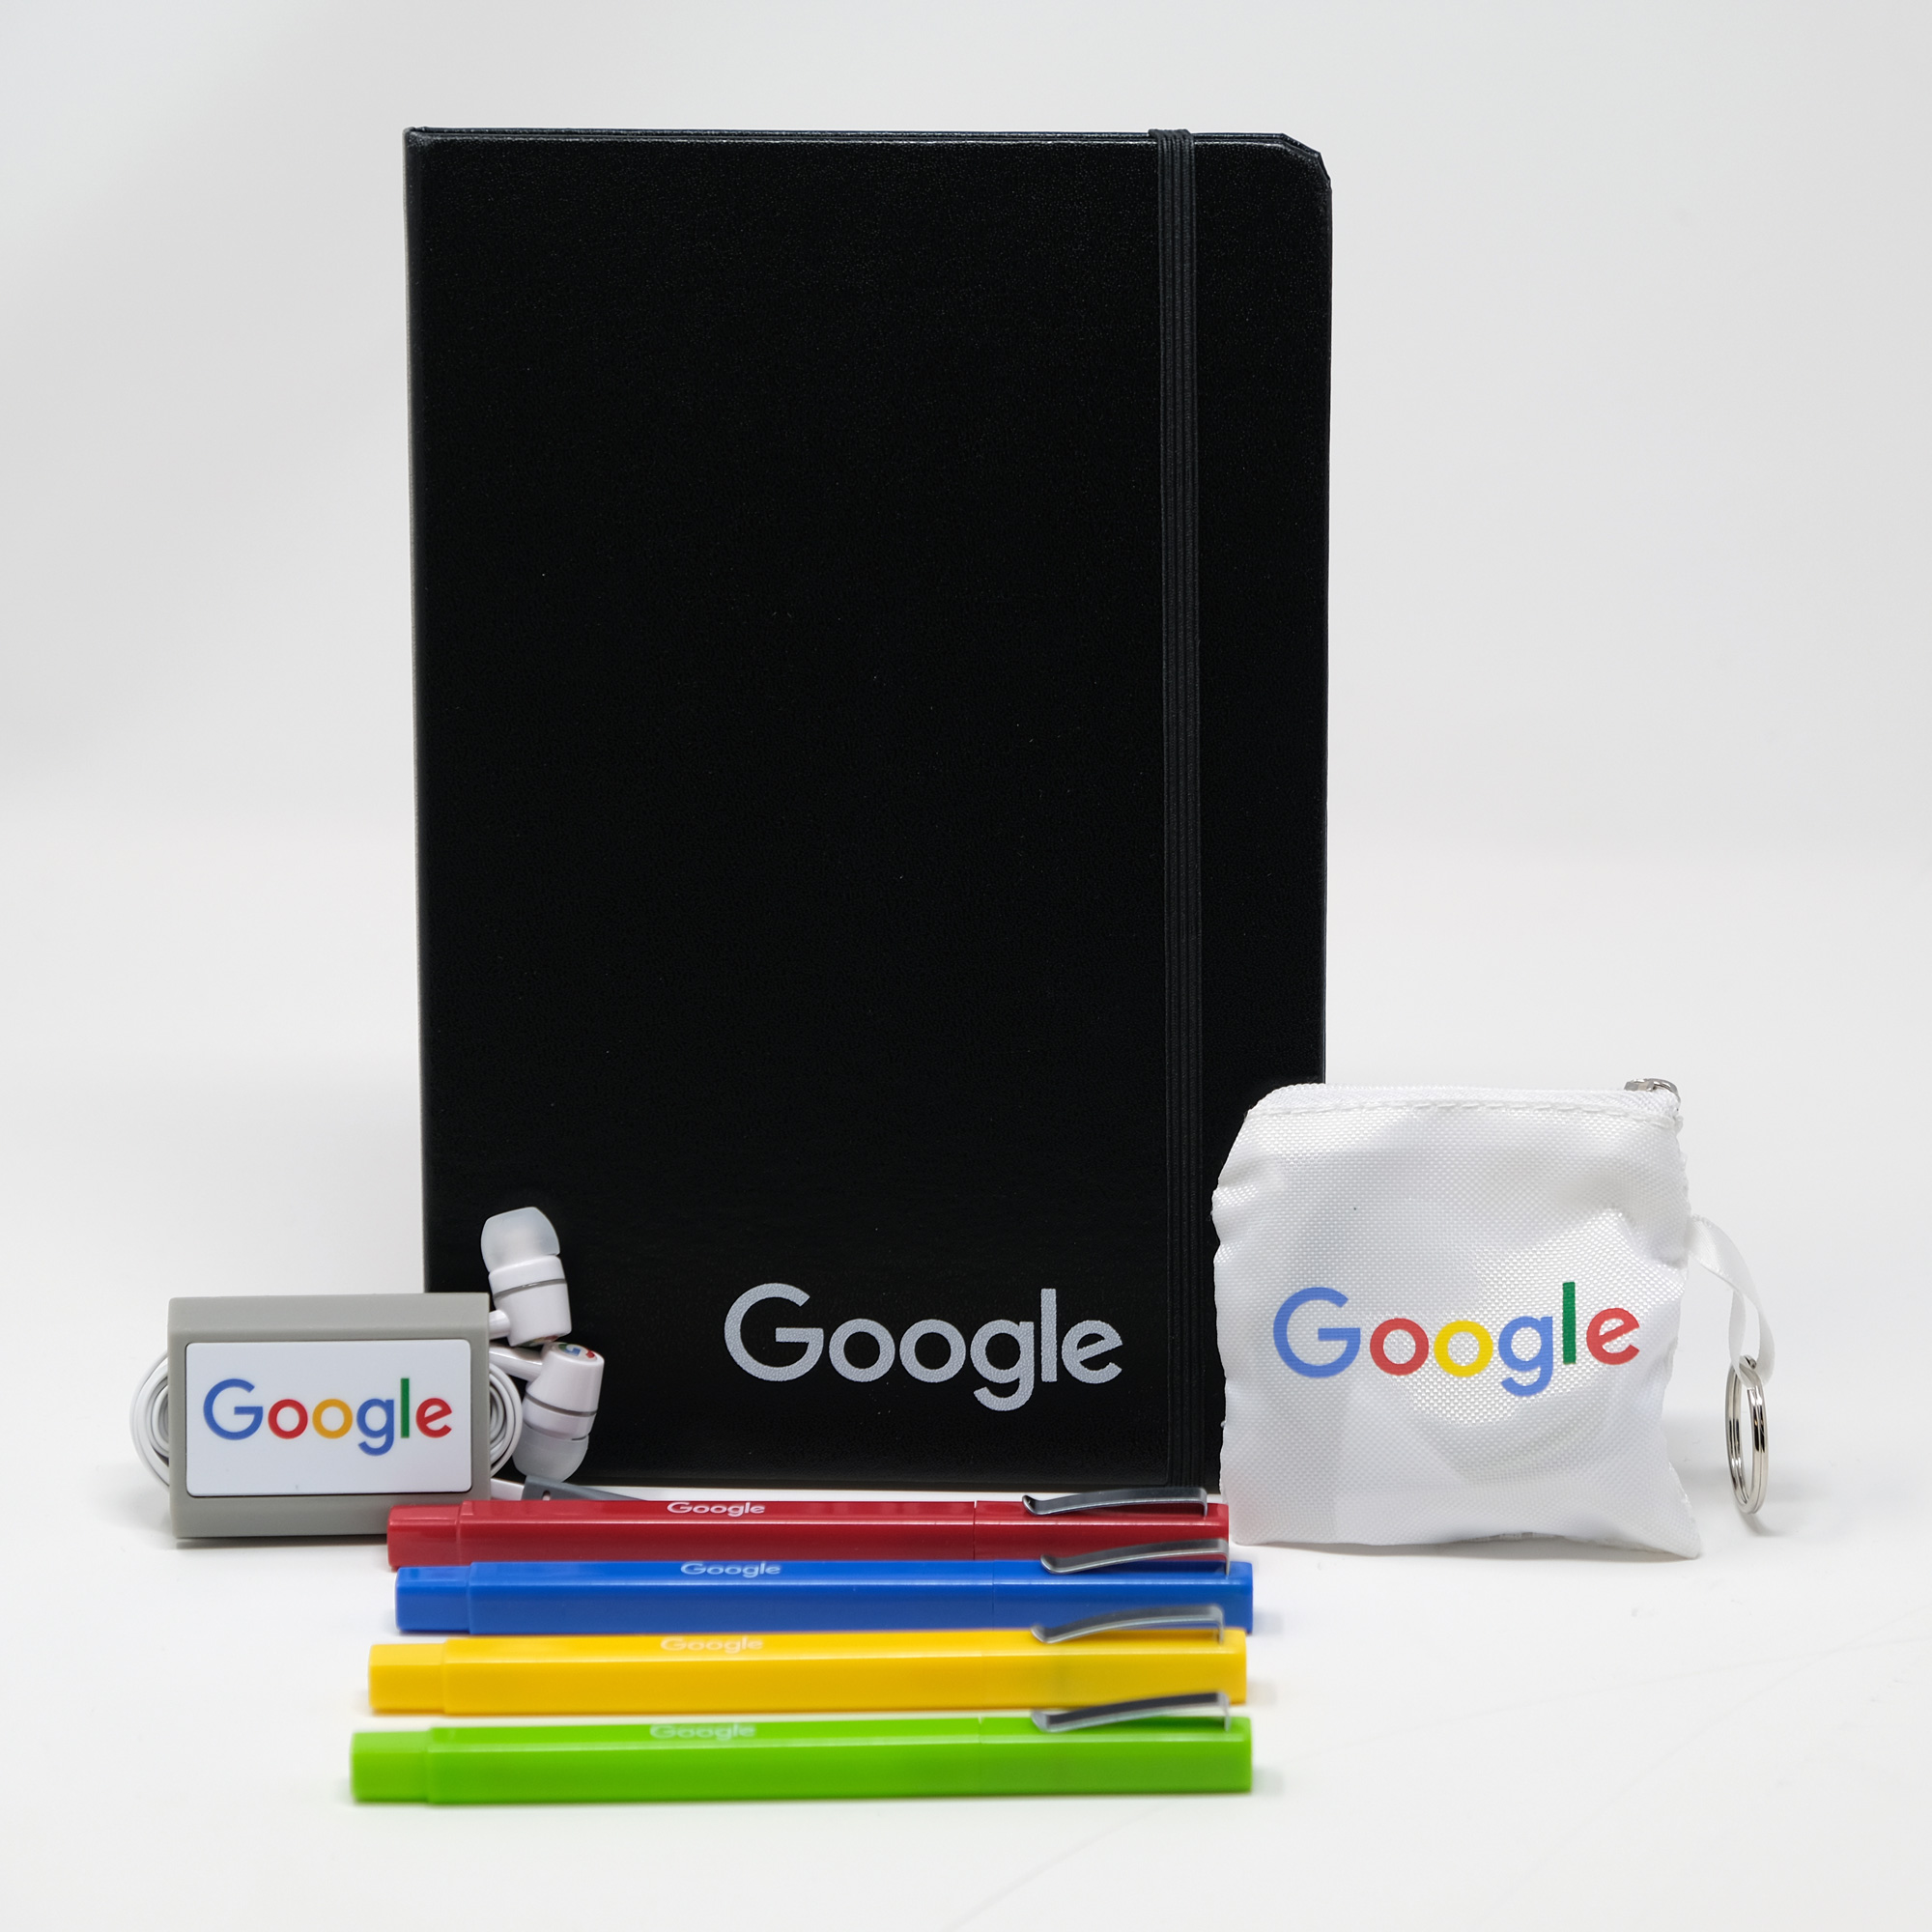 Google Promo Products